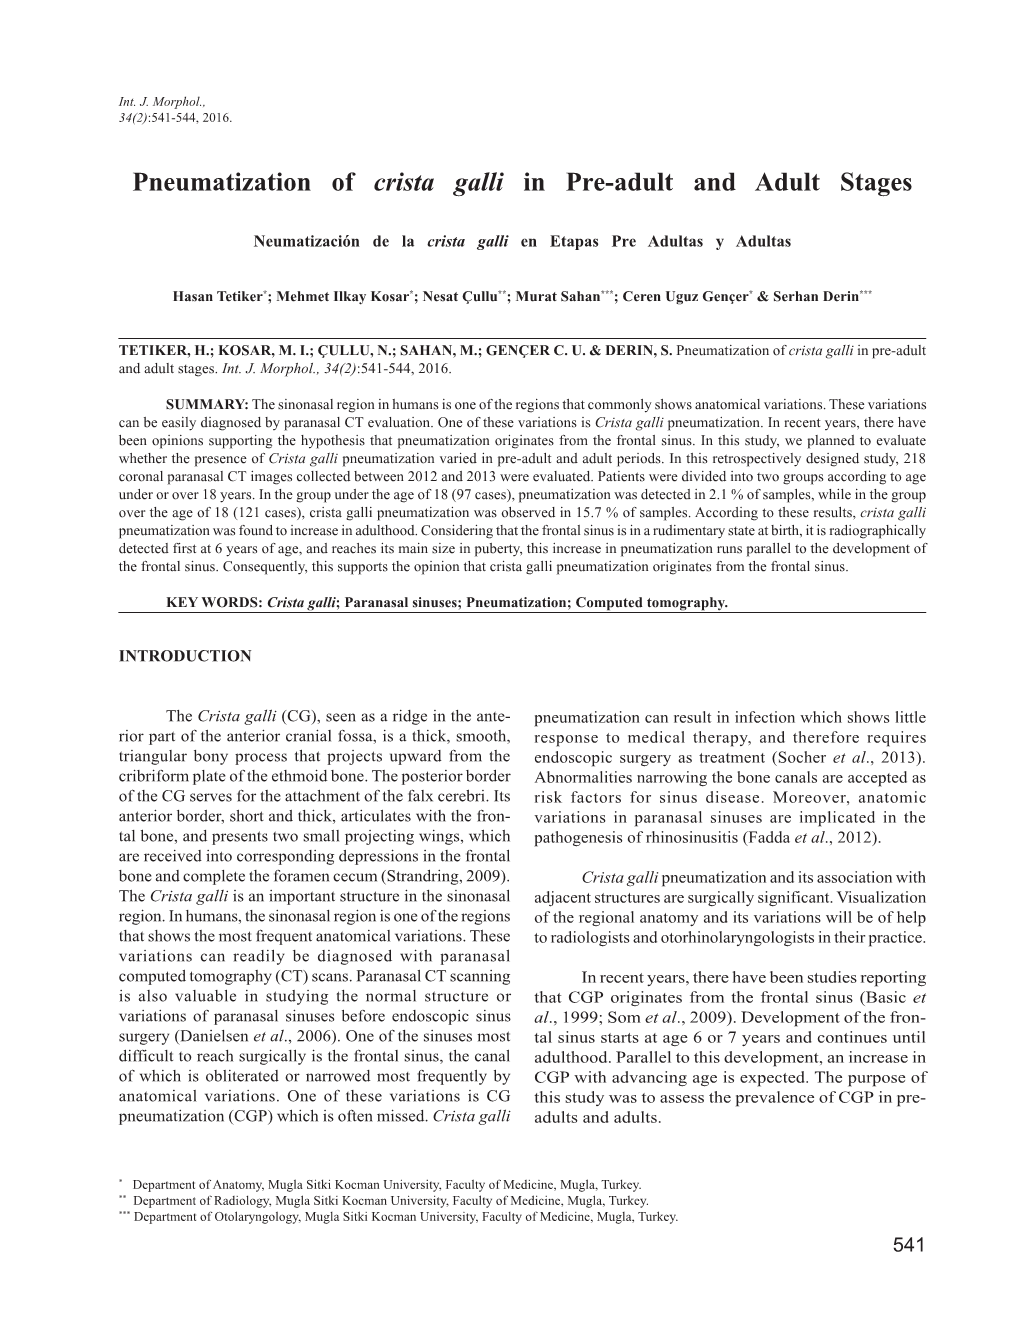 Pneumatization of Crista Galli in Pre-Adult and Adult Stages